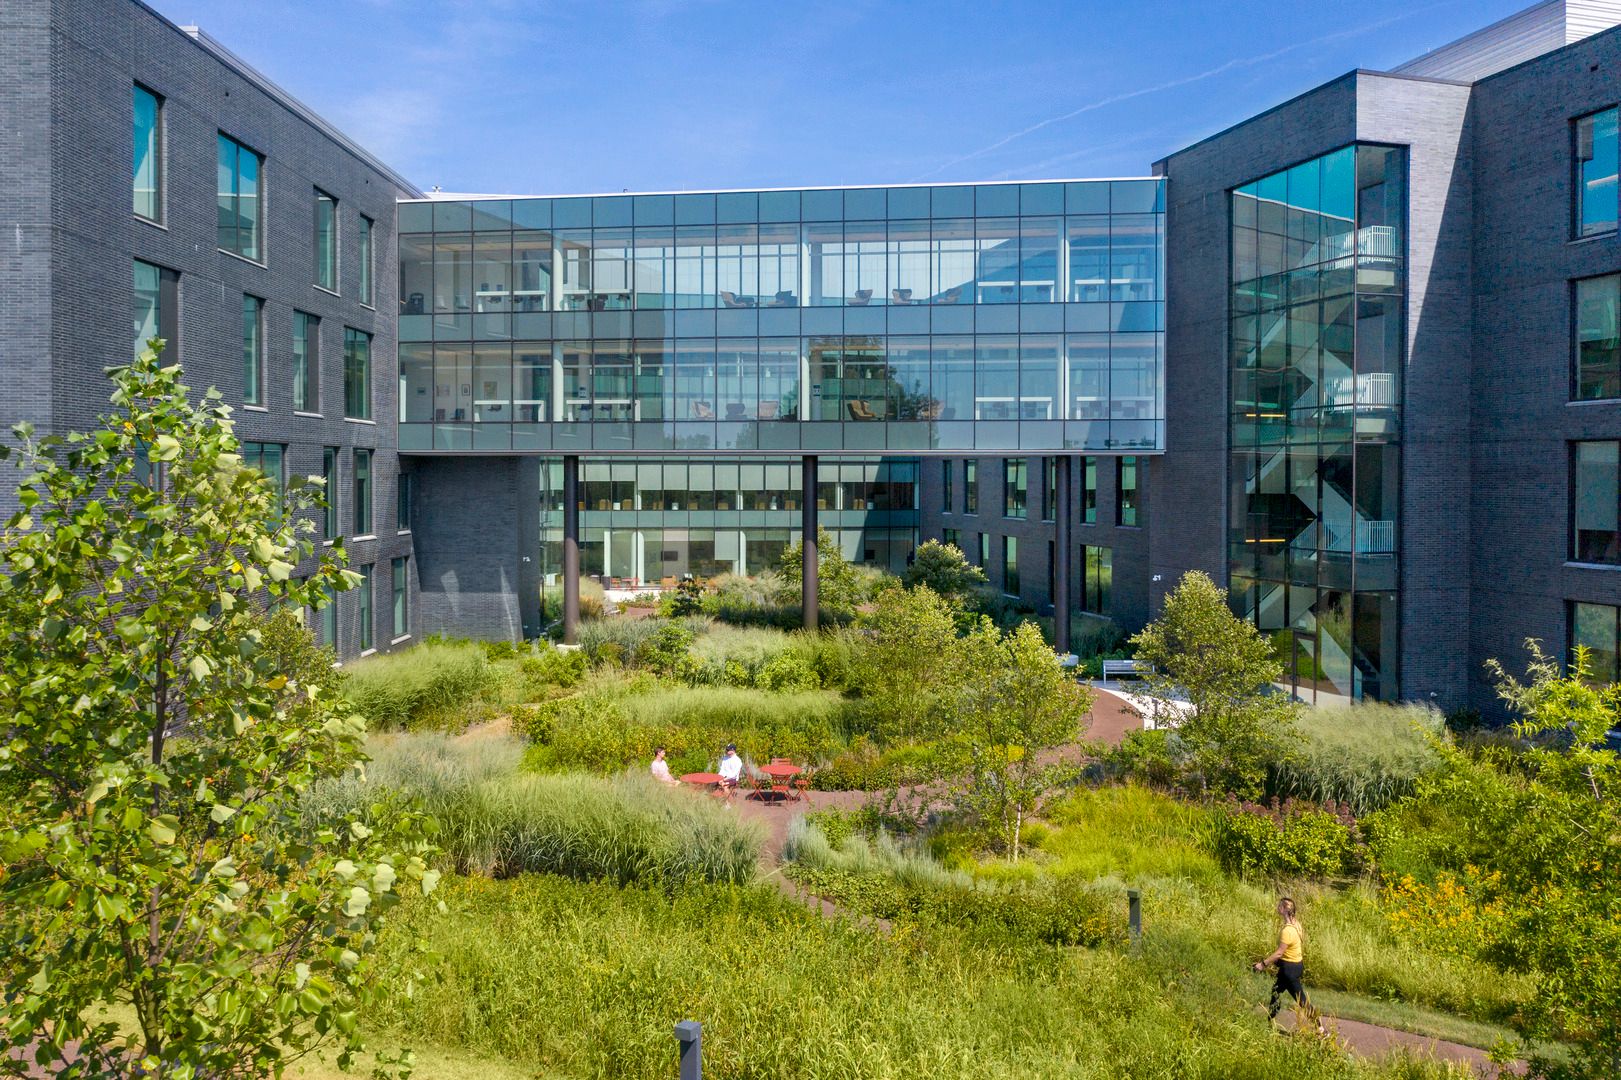 Penn Medicine Radnor building with LEED Gold design features